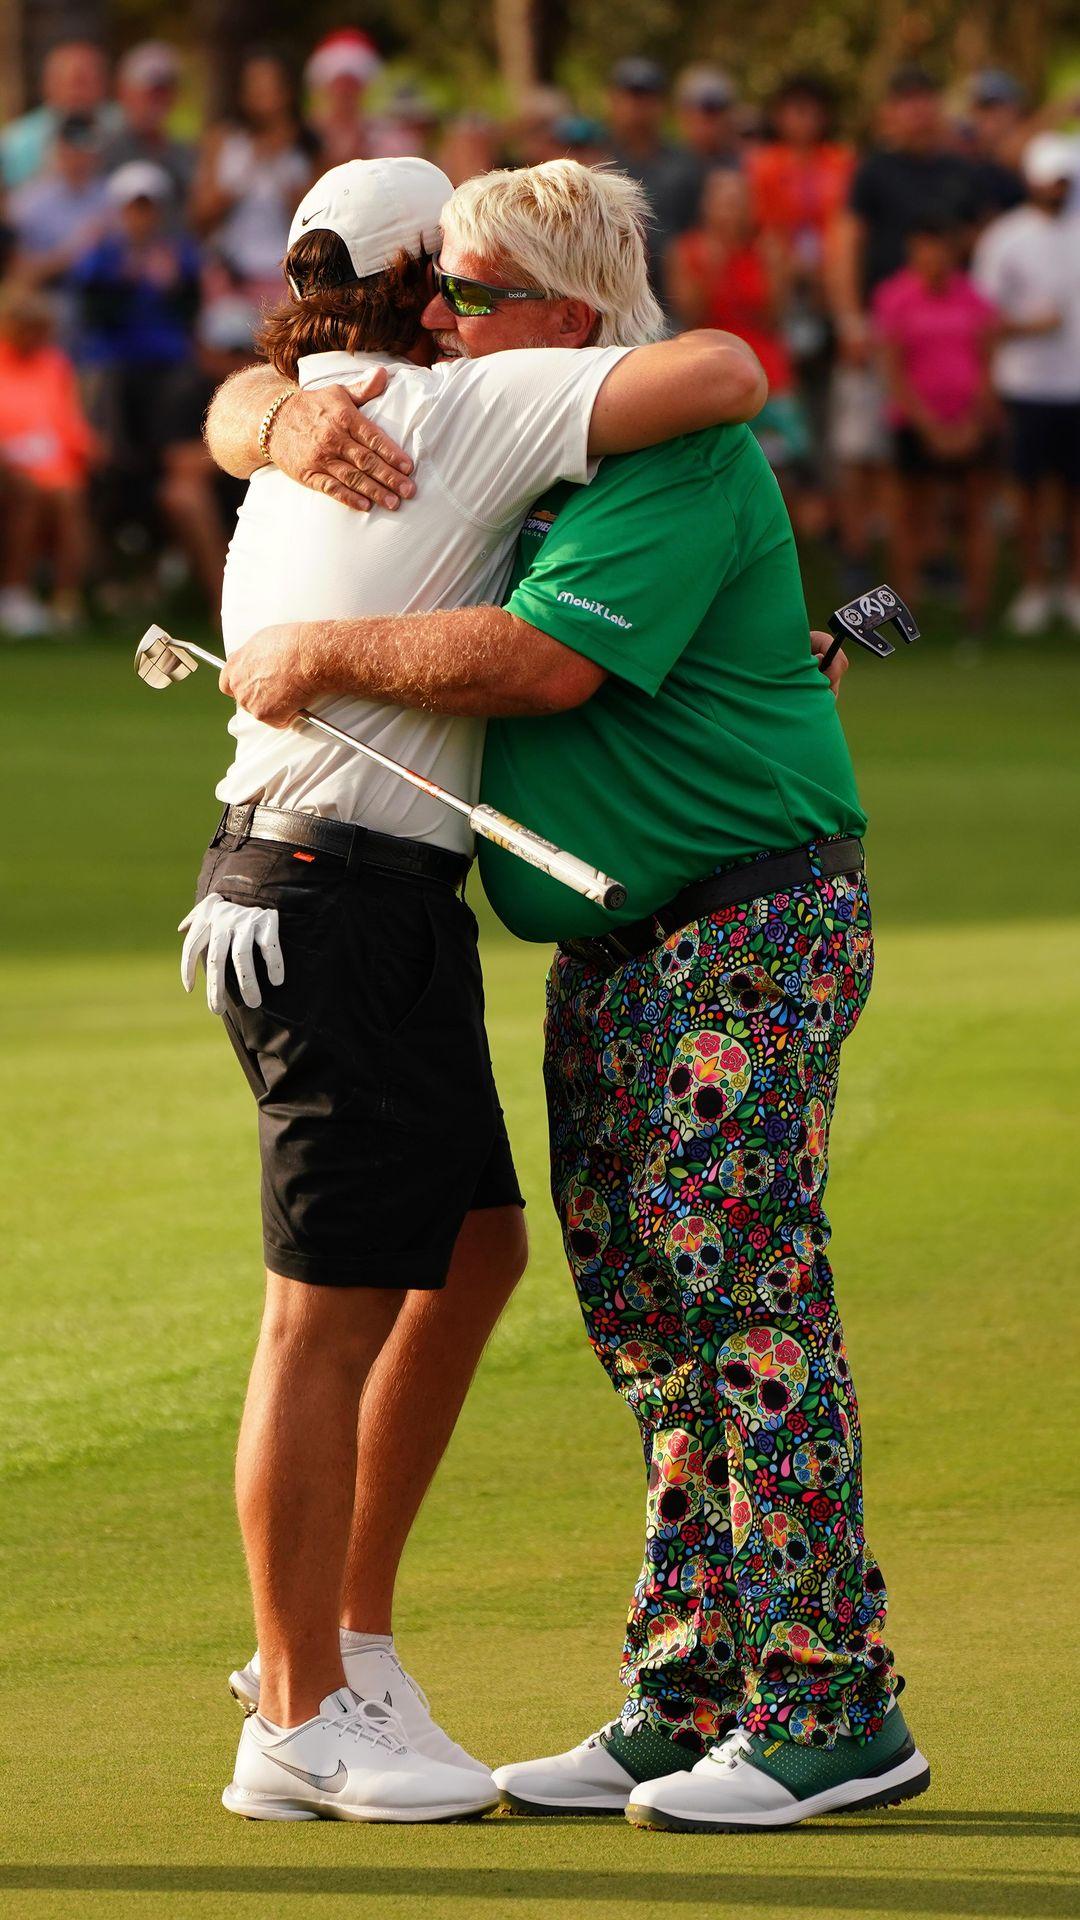 John Daly Instagram Post Influencer Campaign